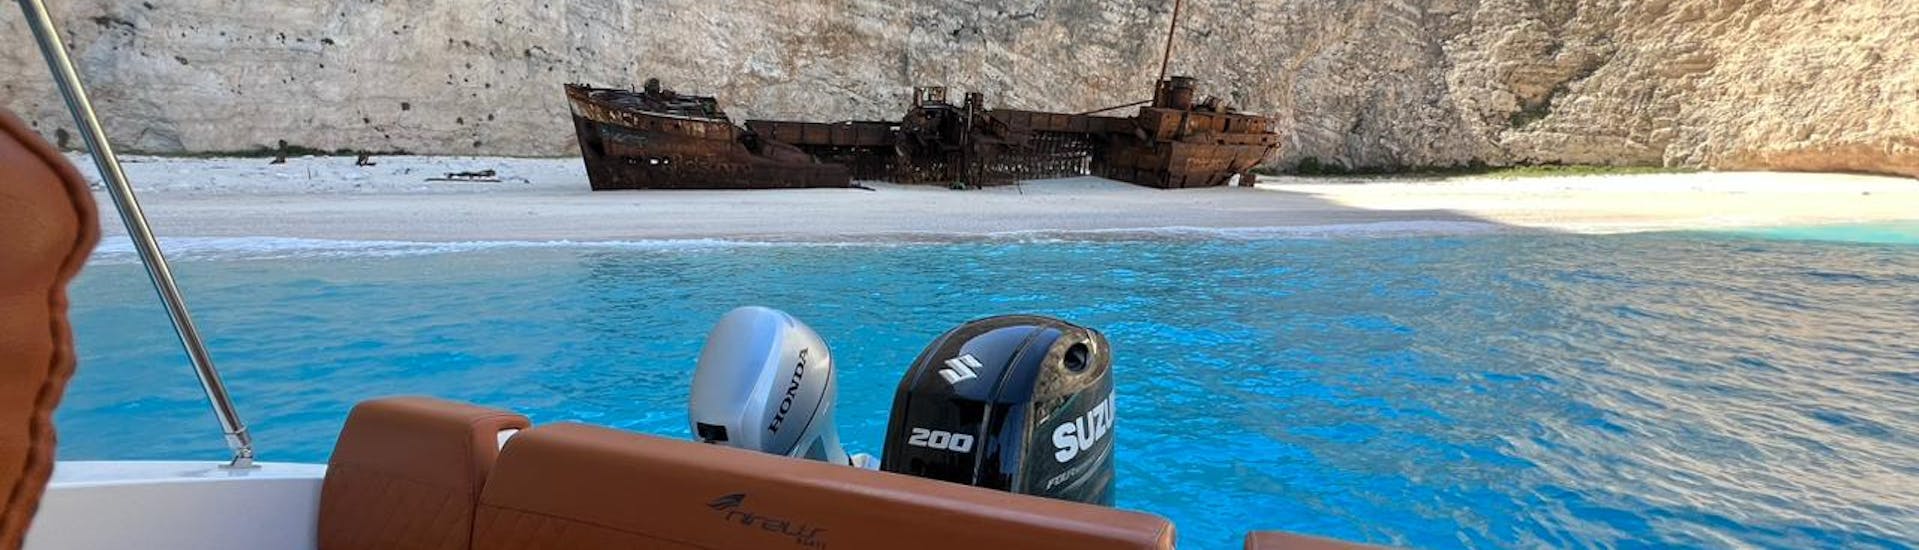 A view on the famous Shipwreck on Navagio Beach during the Private Boat Trip to Shipwreck Beach and Blue Caves with Snorkeling from Mistral Rentals Zakynthos.